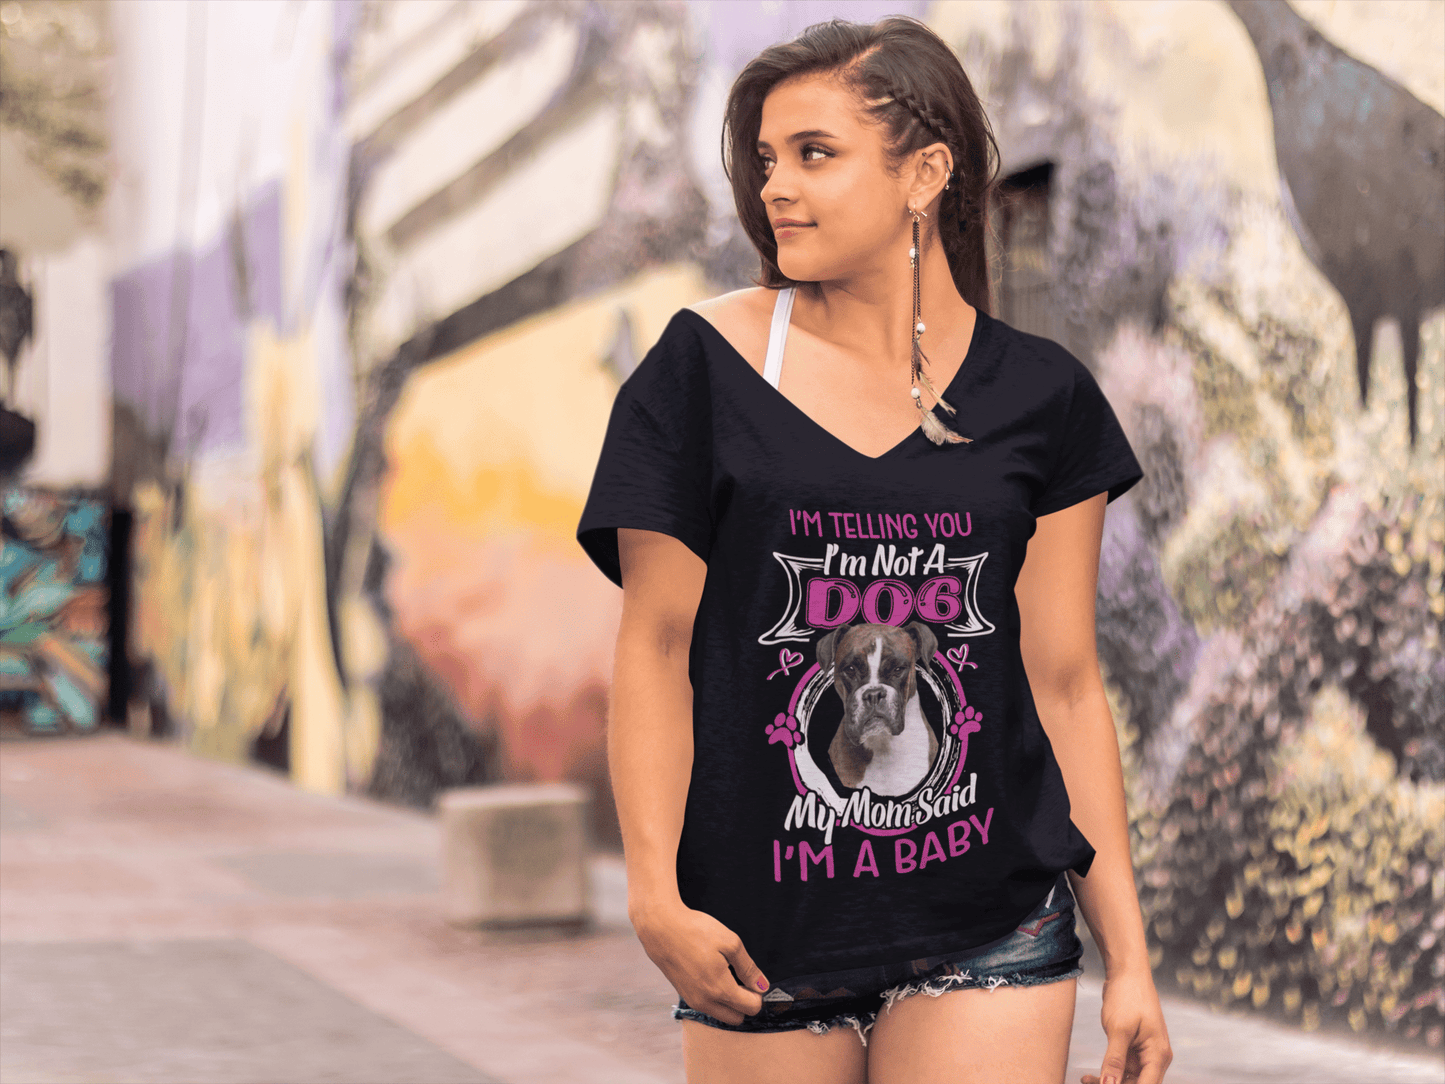 ULTRABASIC Women's T-Shirt I'm Telling You I'm Not a Boxer - My Mom Said I'm a Baby - Cute Puppy Dog Lover Tee Shirt